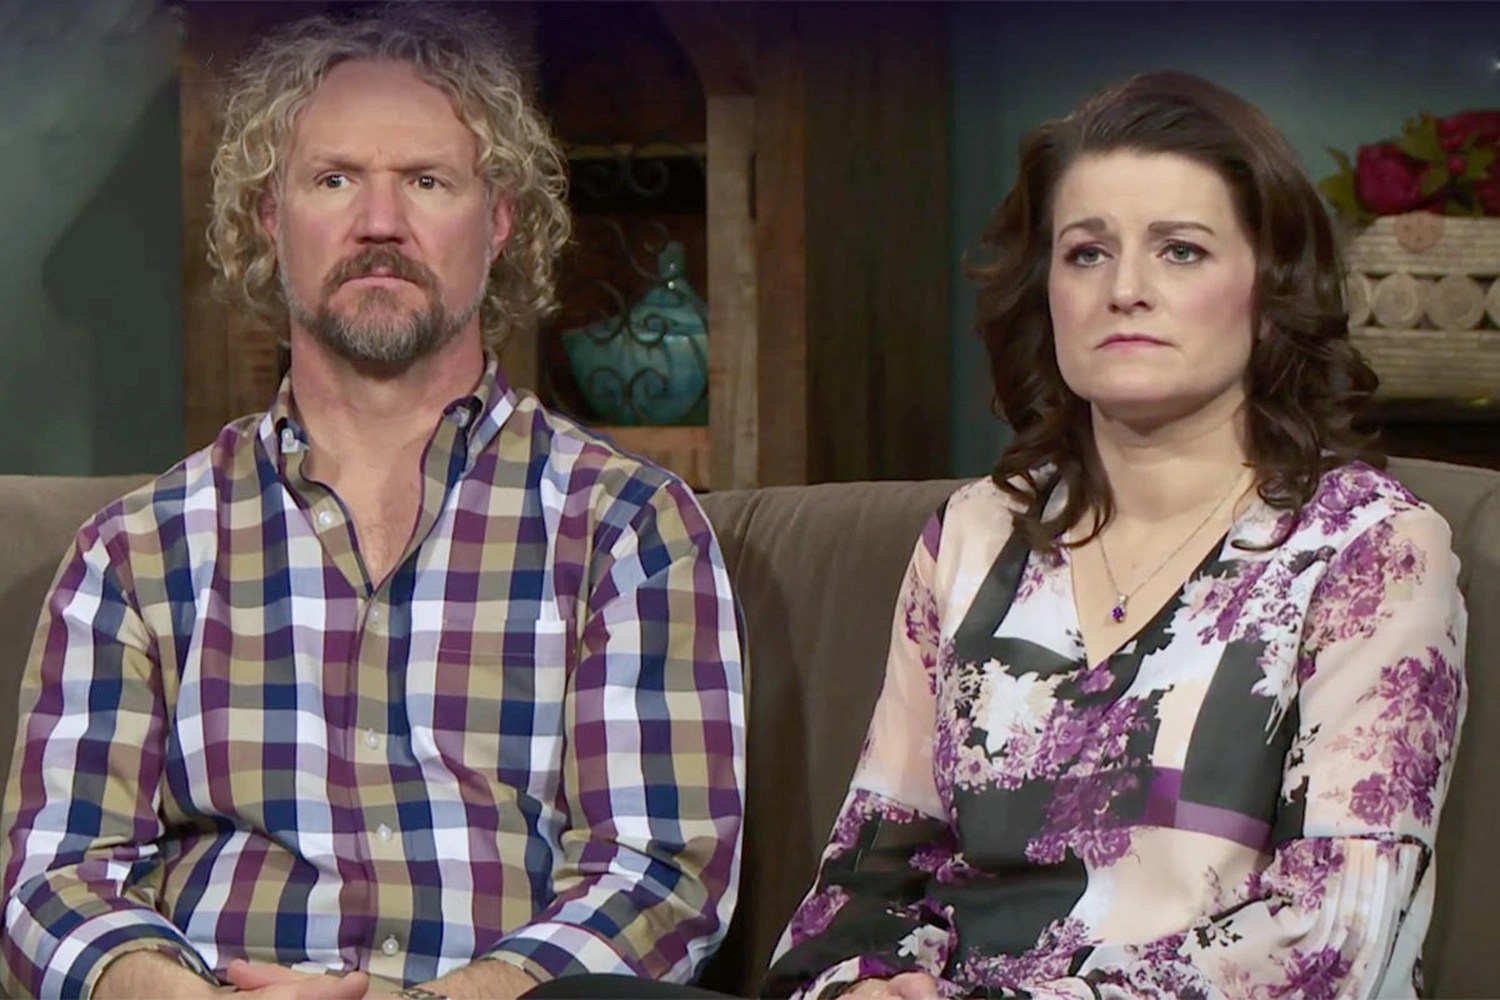 Kody Brown and Robyn Brown during an interview for 'Sister Wives' on TLC.